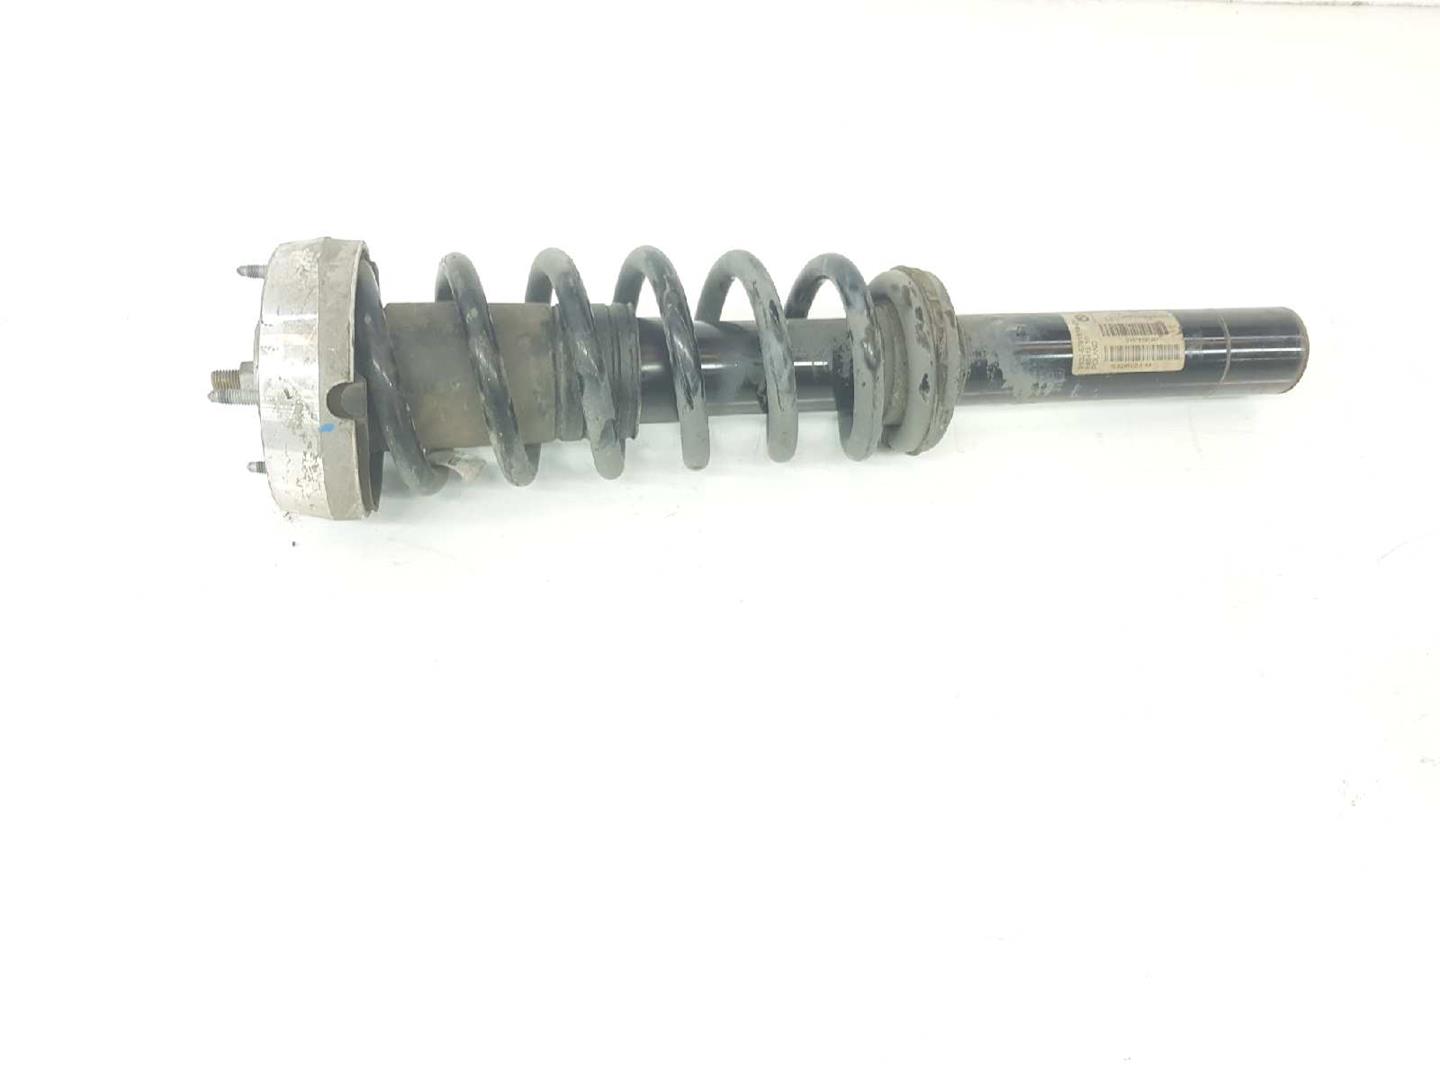 BMW X6 E71/E72 (2008-2012) Front Right Shock Absorber 31326781918, 14941510, 22244957 19729625